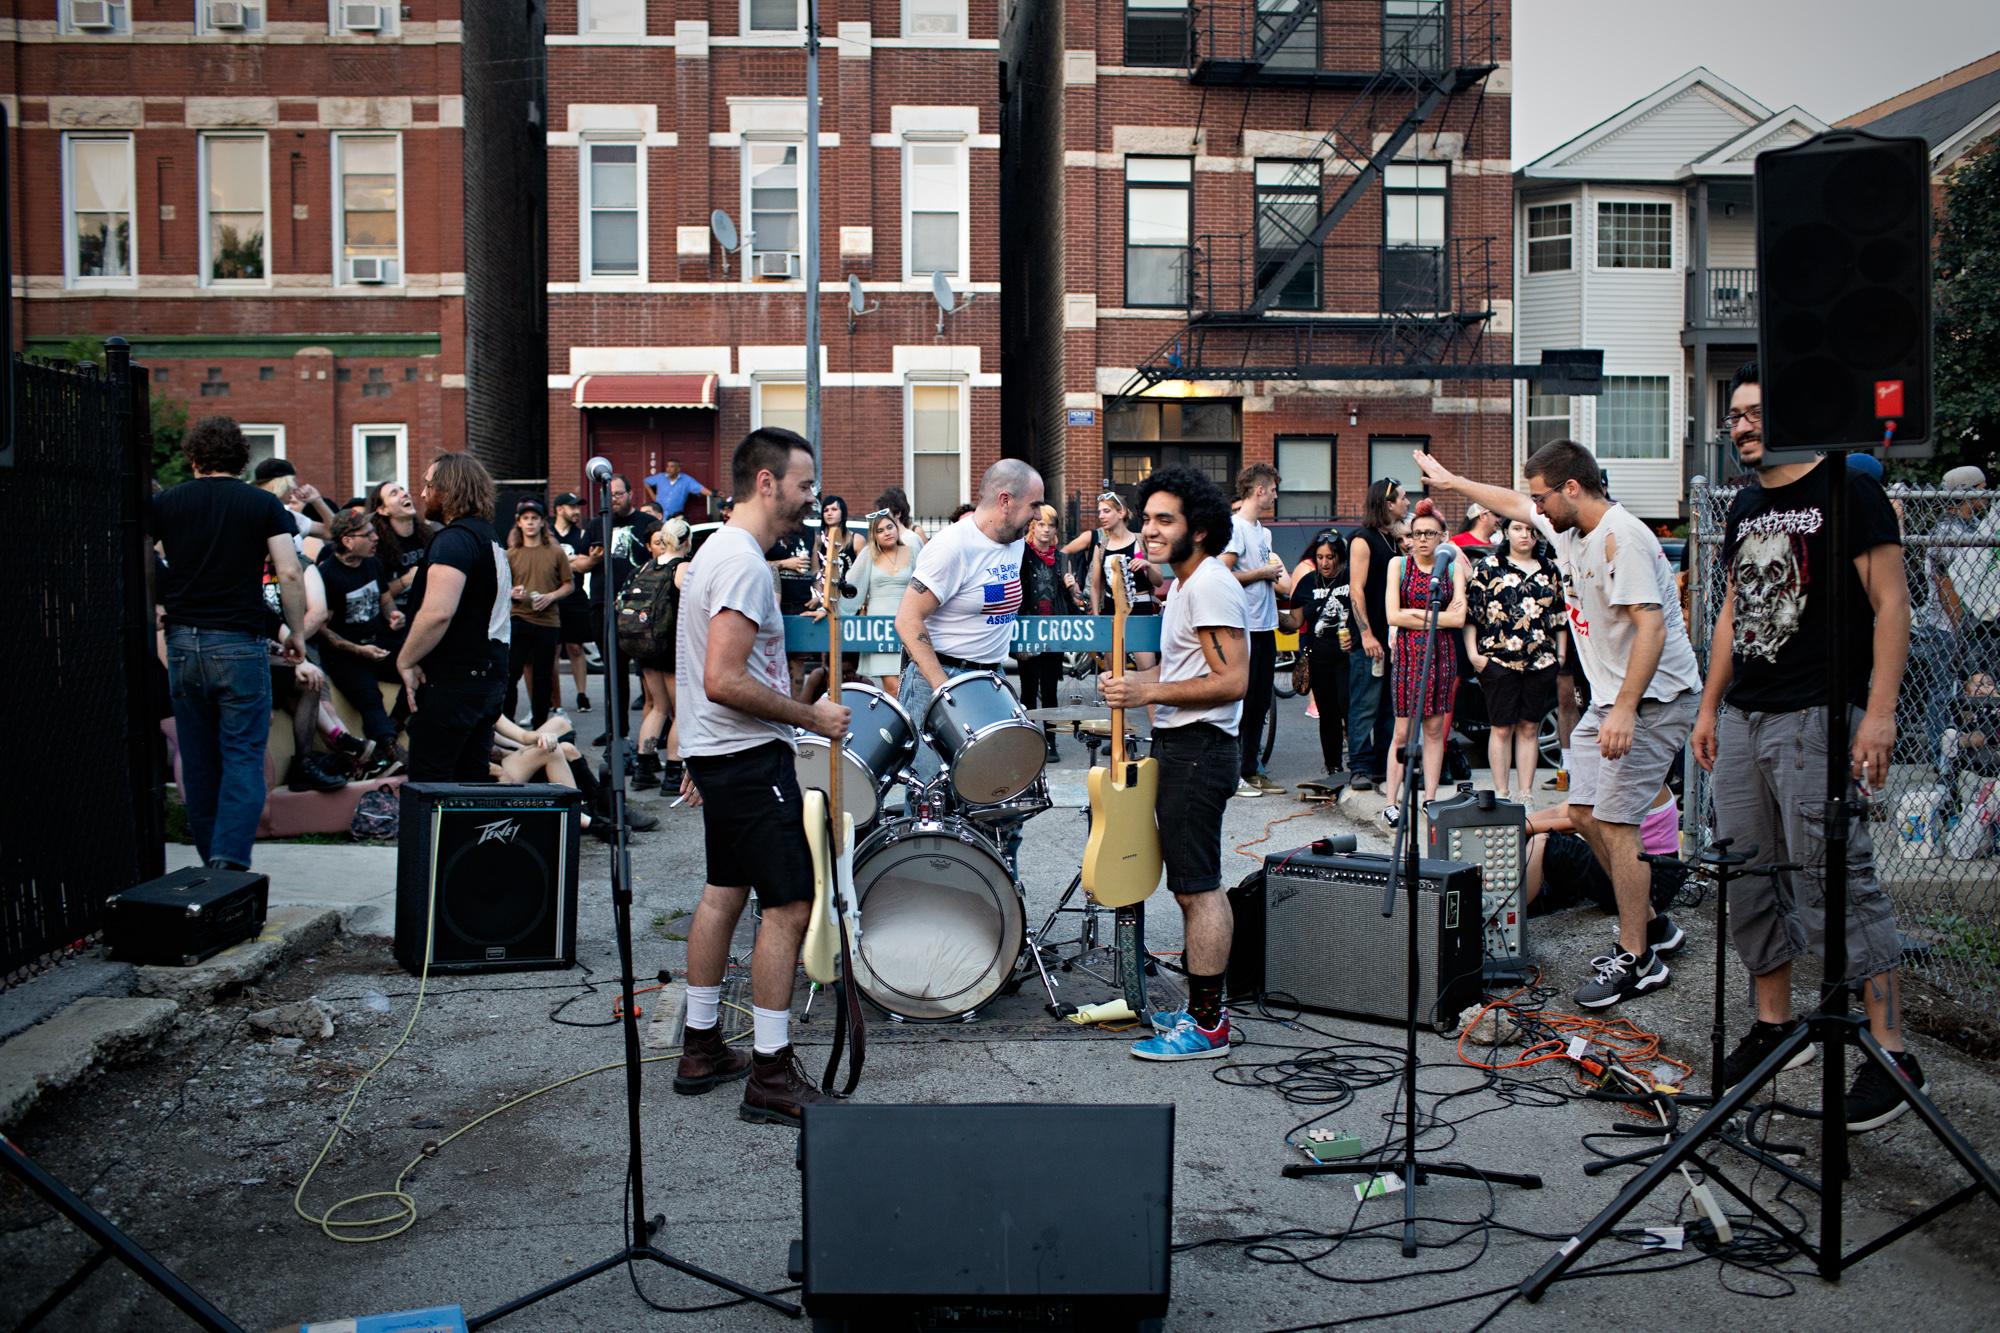 Pilsen Celebrates The Fourth - Member of a punk band prepare to play in an alley in...